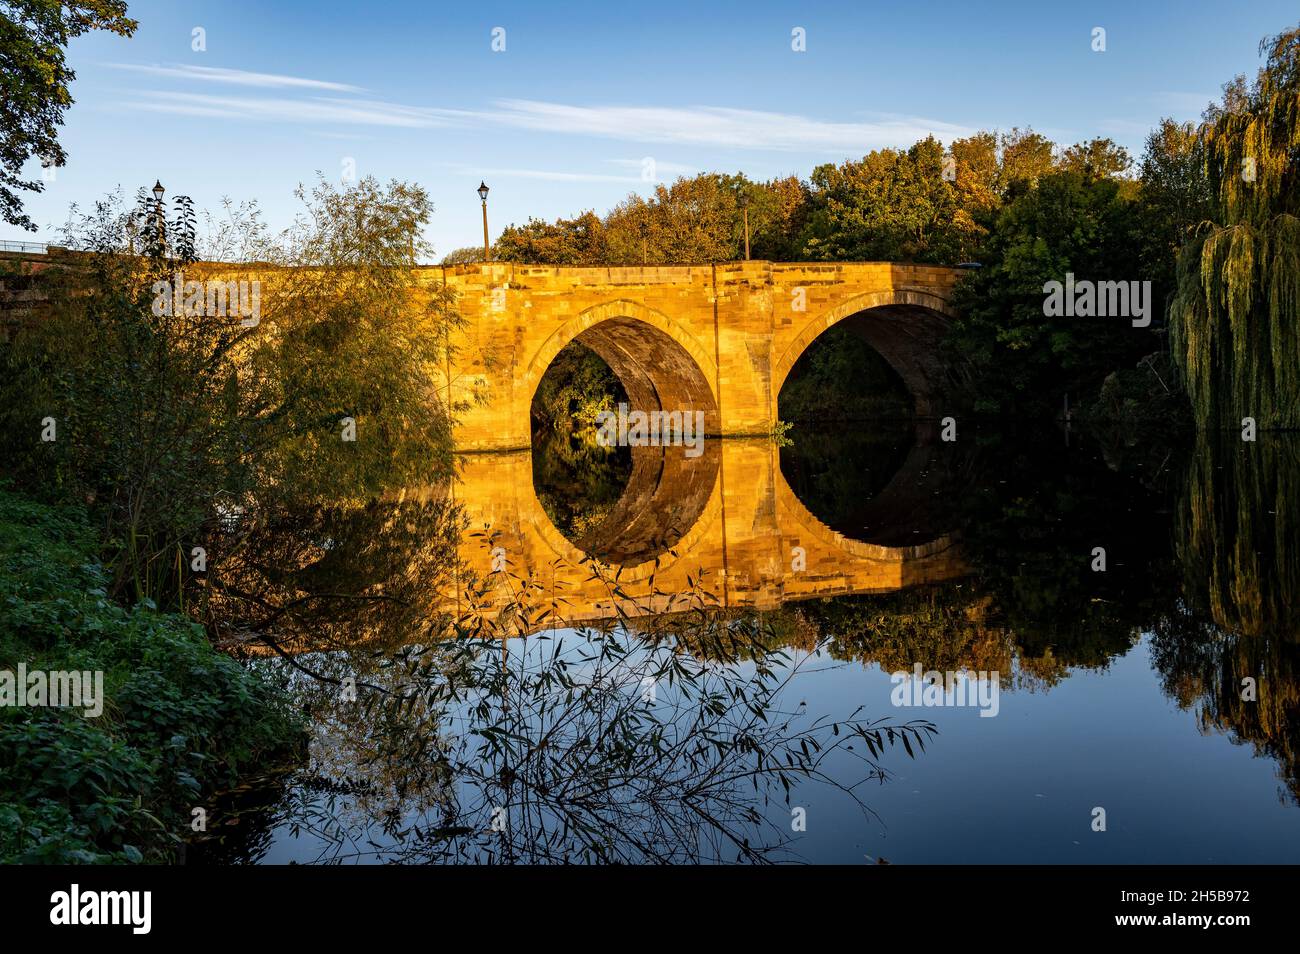 Road bridge over the river Tees in Yarm, North Yorkshire, UK showing great reflections Stock Photo